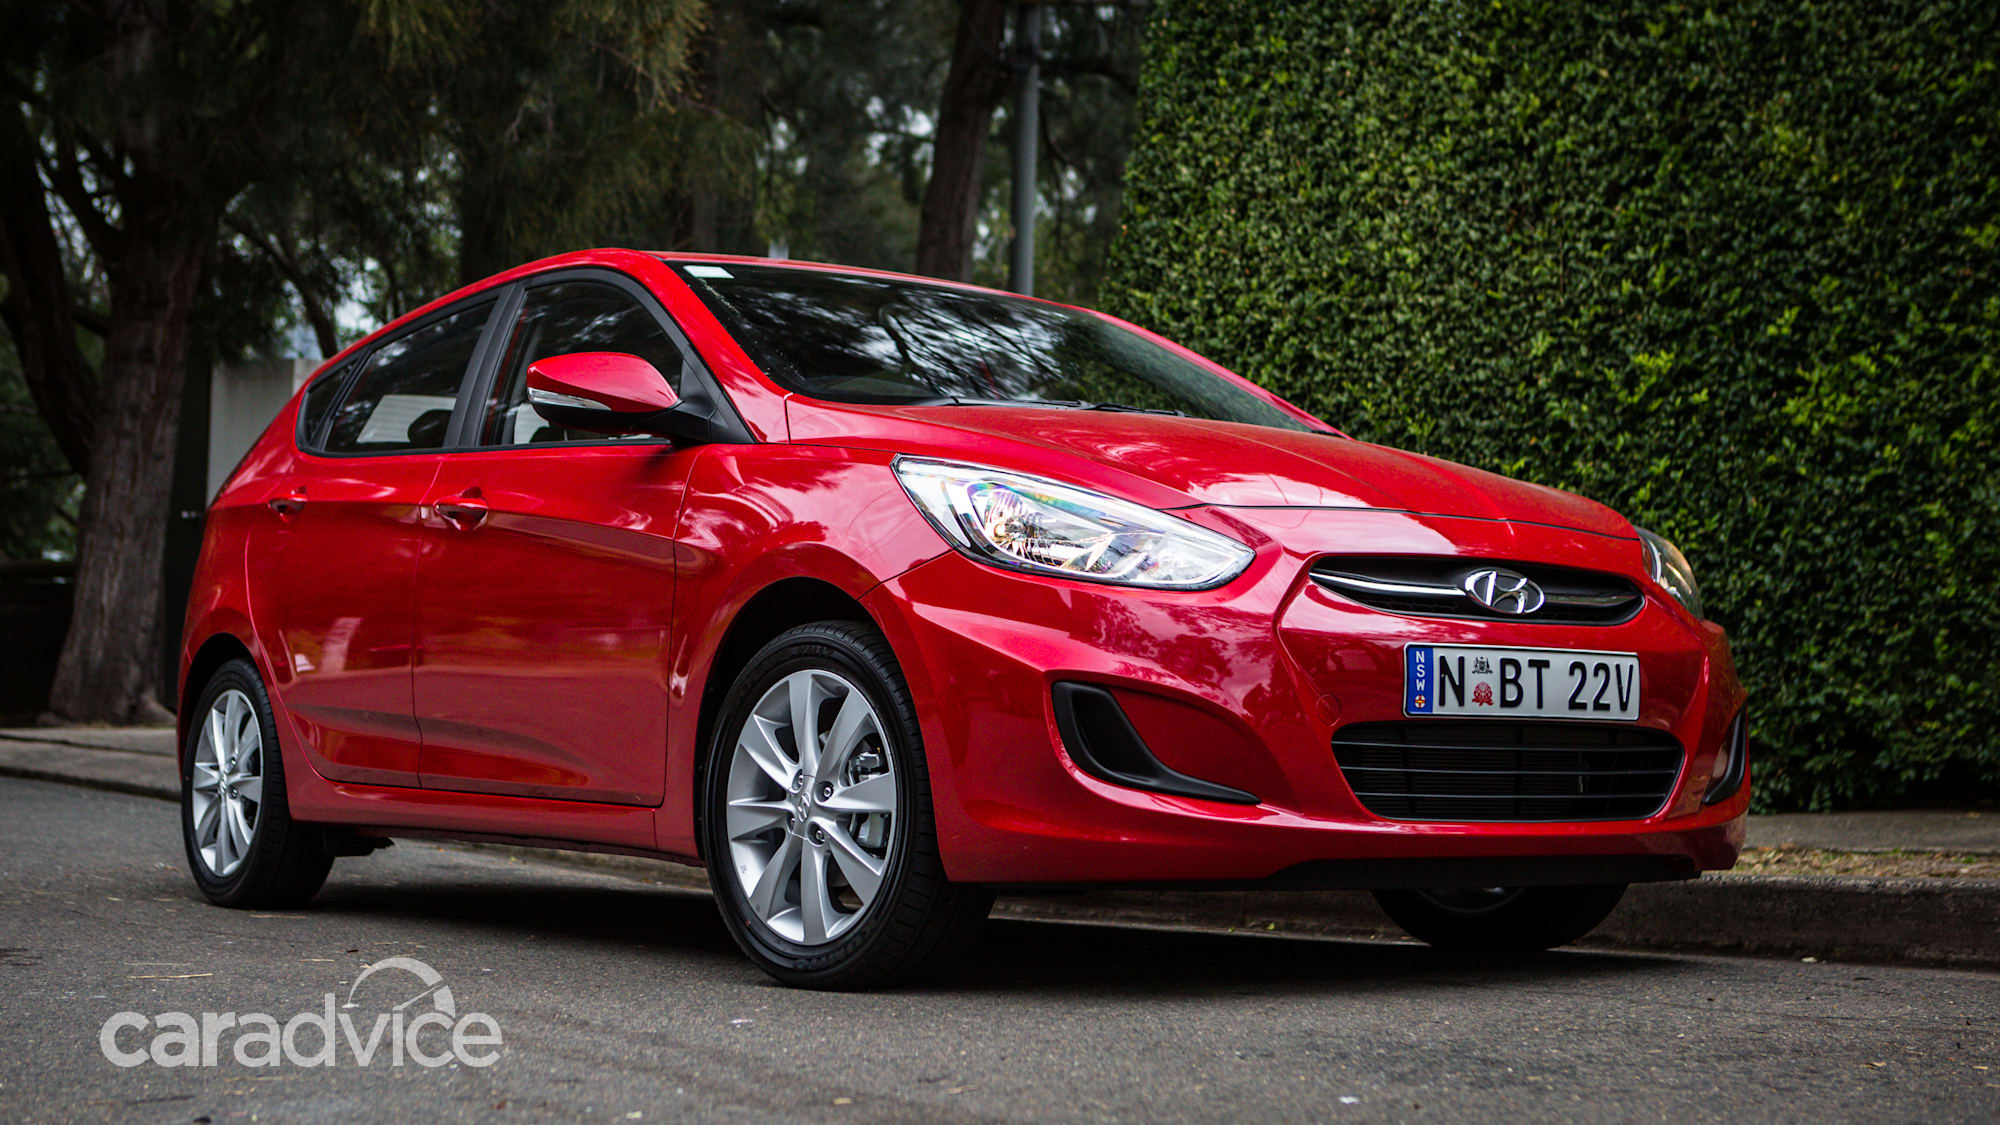 2017 Hyundai Accent Sport hatchback review | CarAdvice